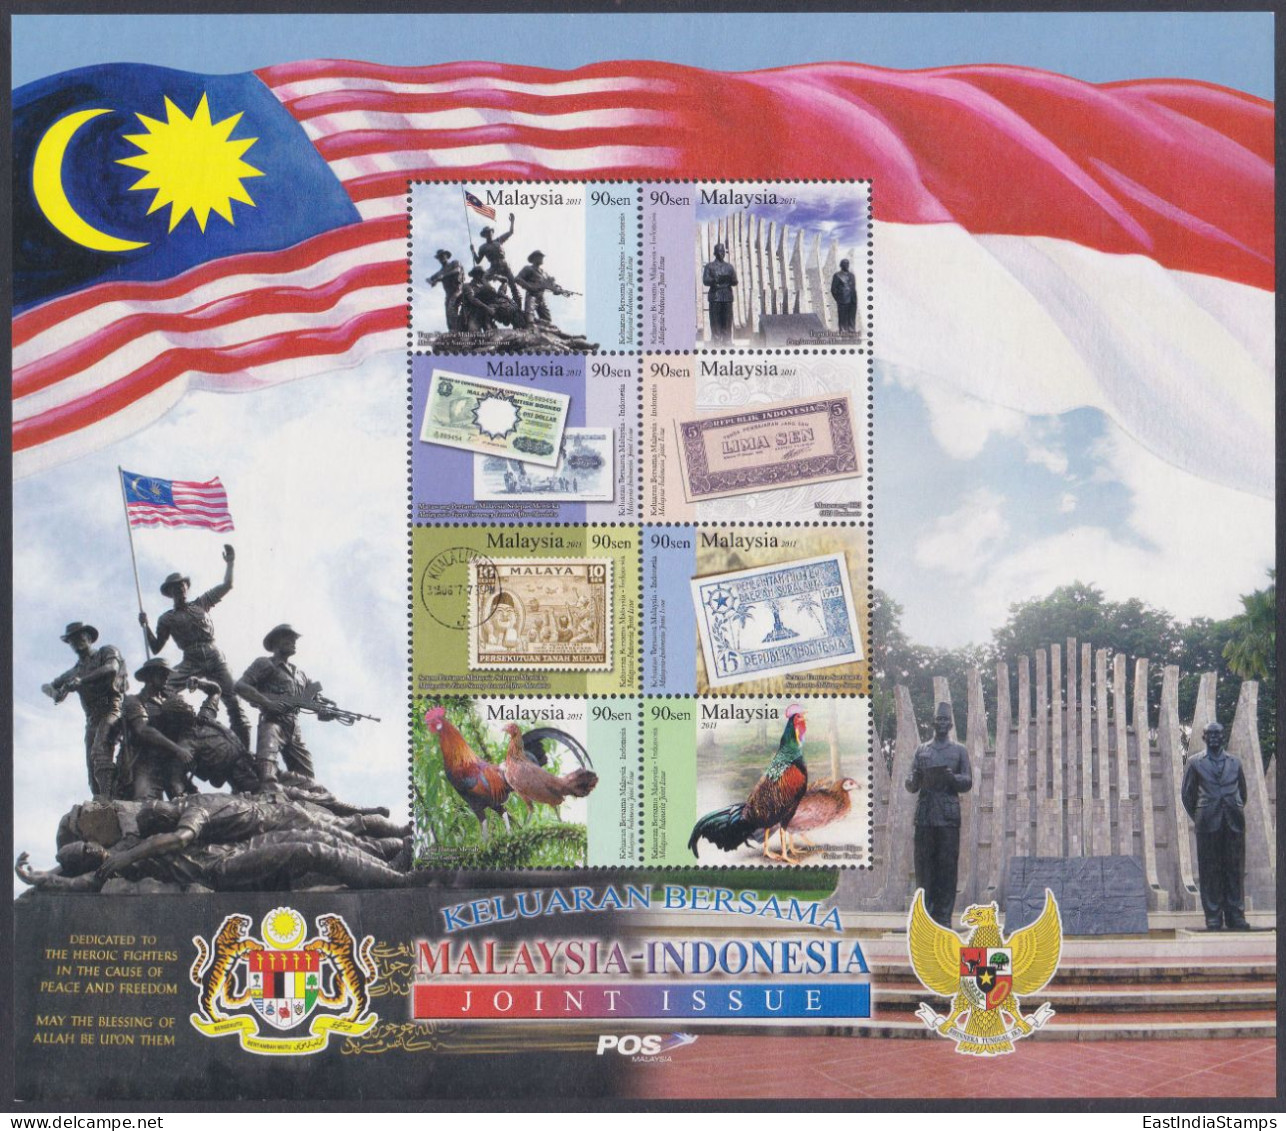 Malaysia 2011 MNH Joint Issue With Indonesia, Banknote, Flag, Soldiers, Chicken, Fowl, Rooster, Stamps On Stamp, Statue - Malesia (1964-...)